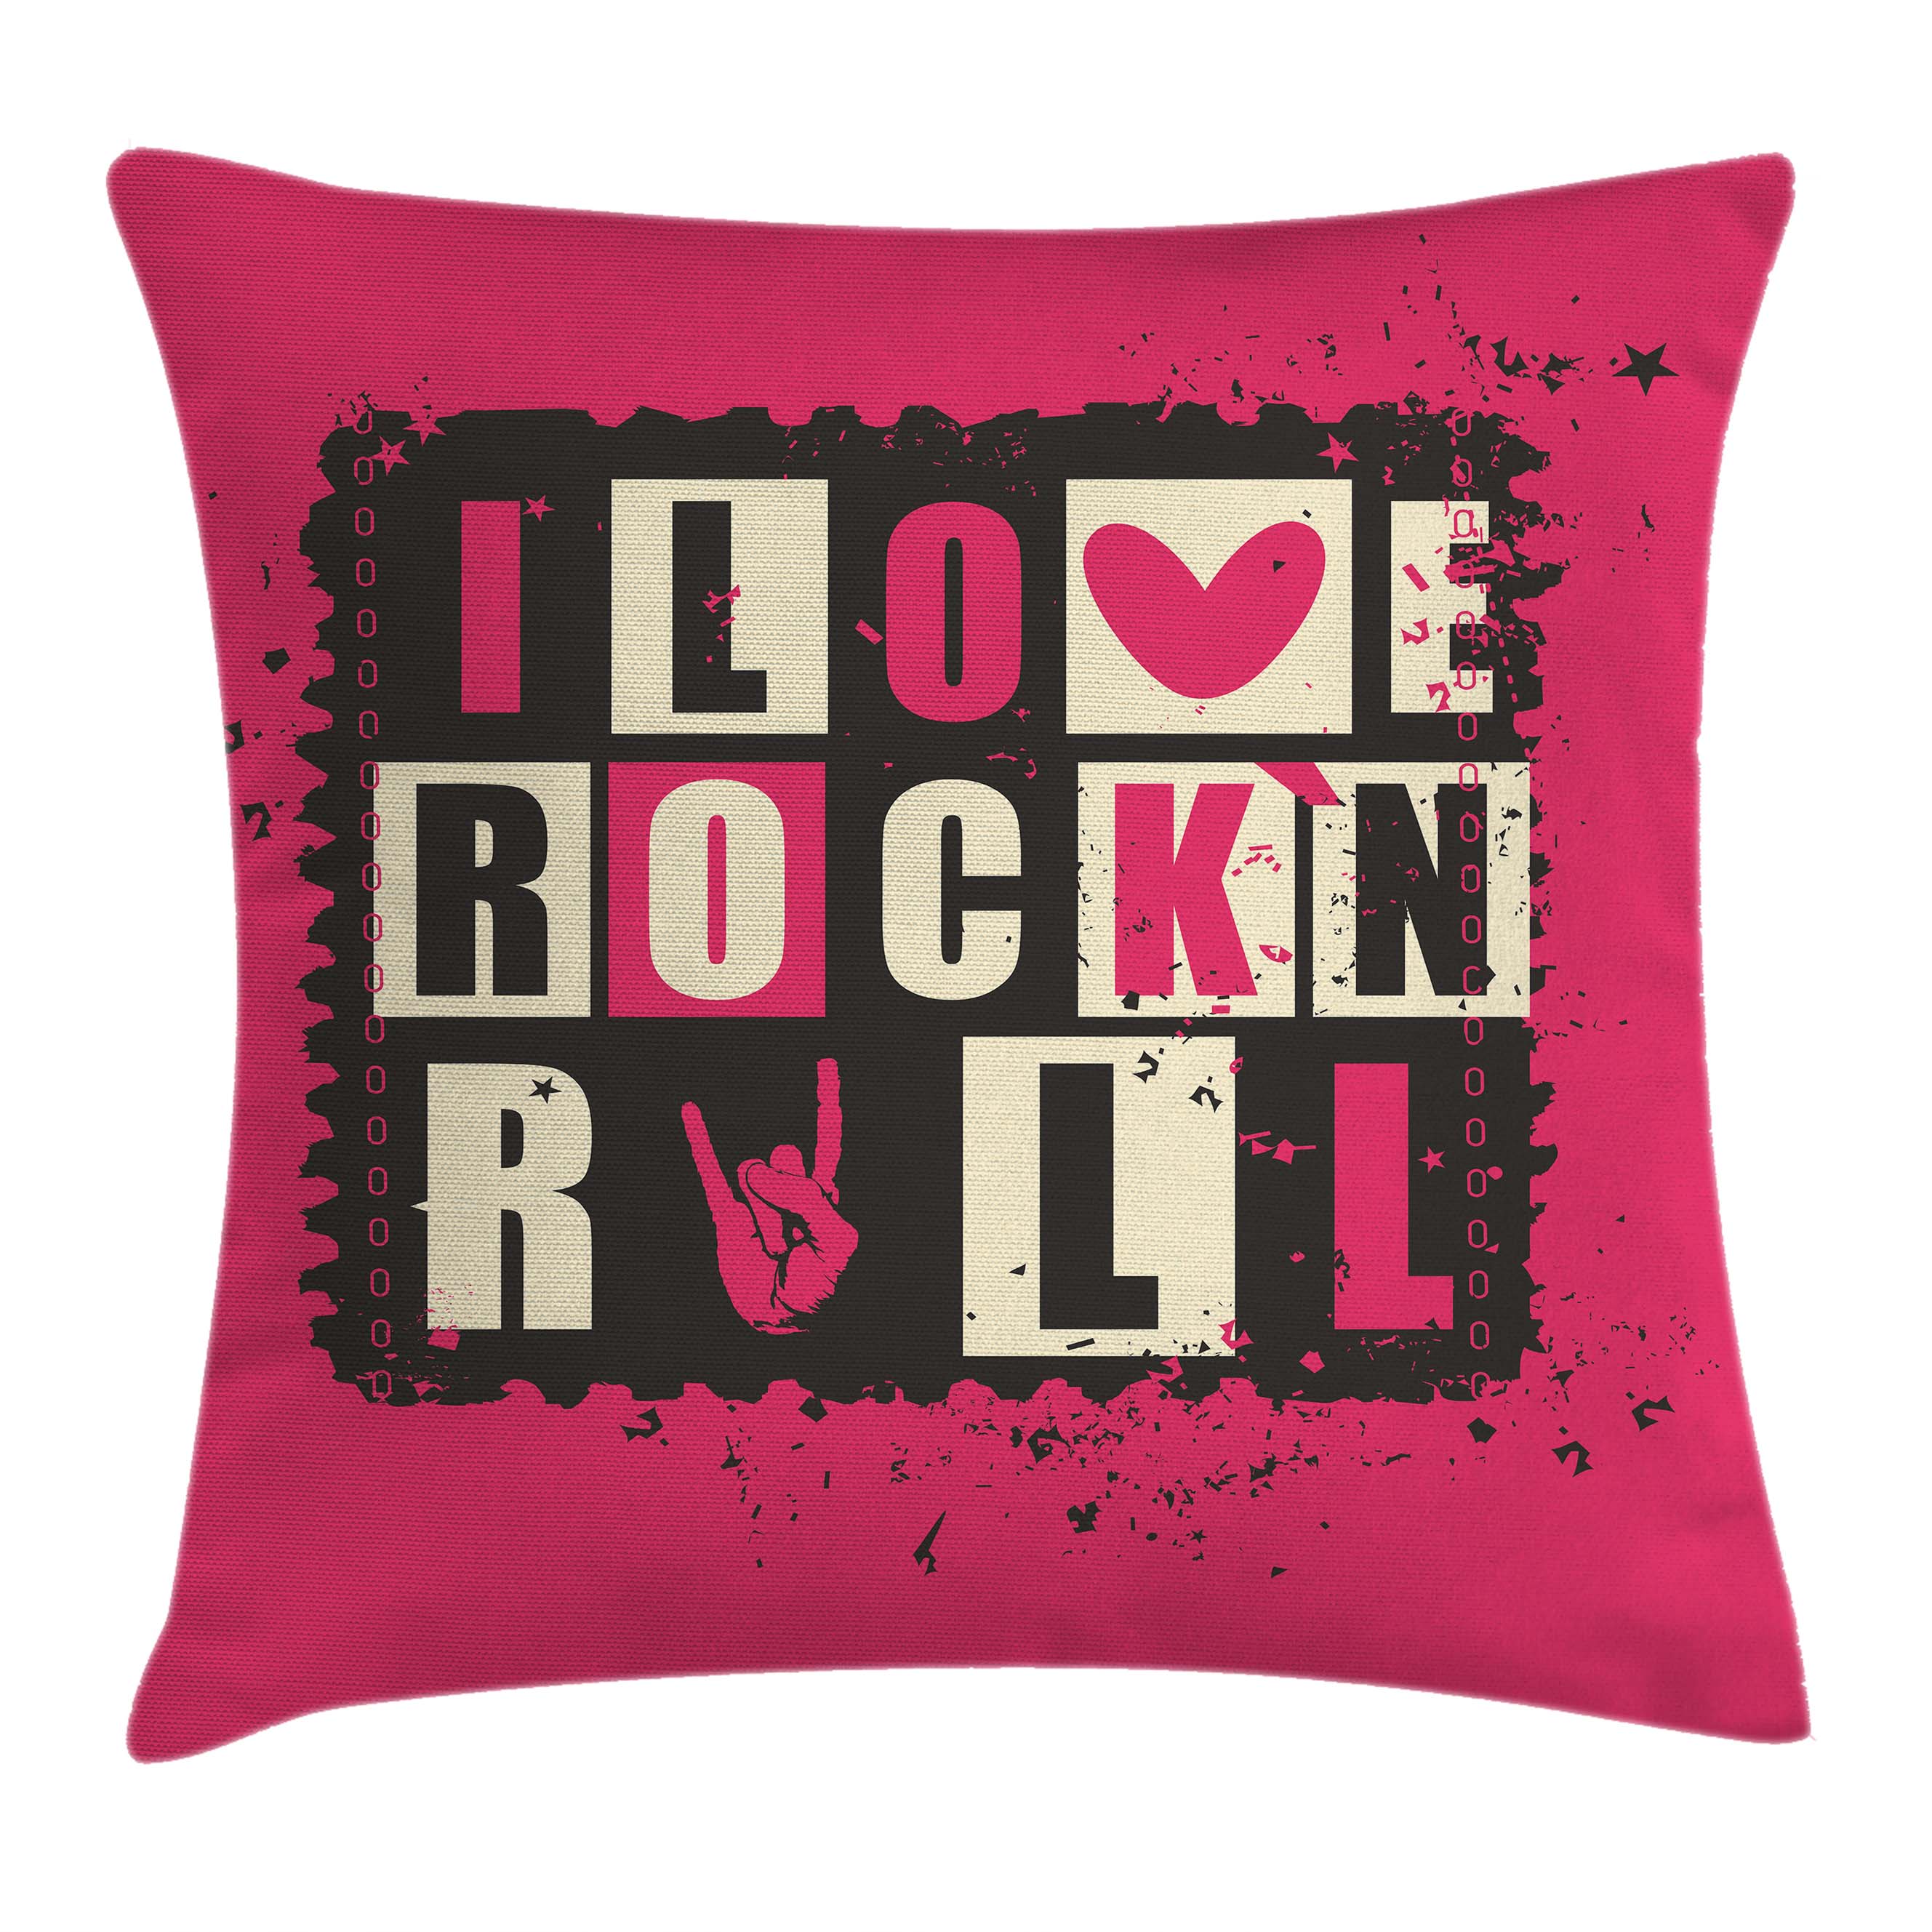 Retro Throw Pillow Cushion Cover Vintage Letters I Love Rock N Roll On Grunge Poster Stamp